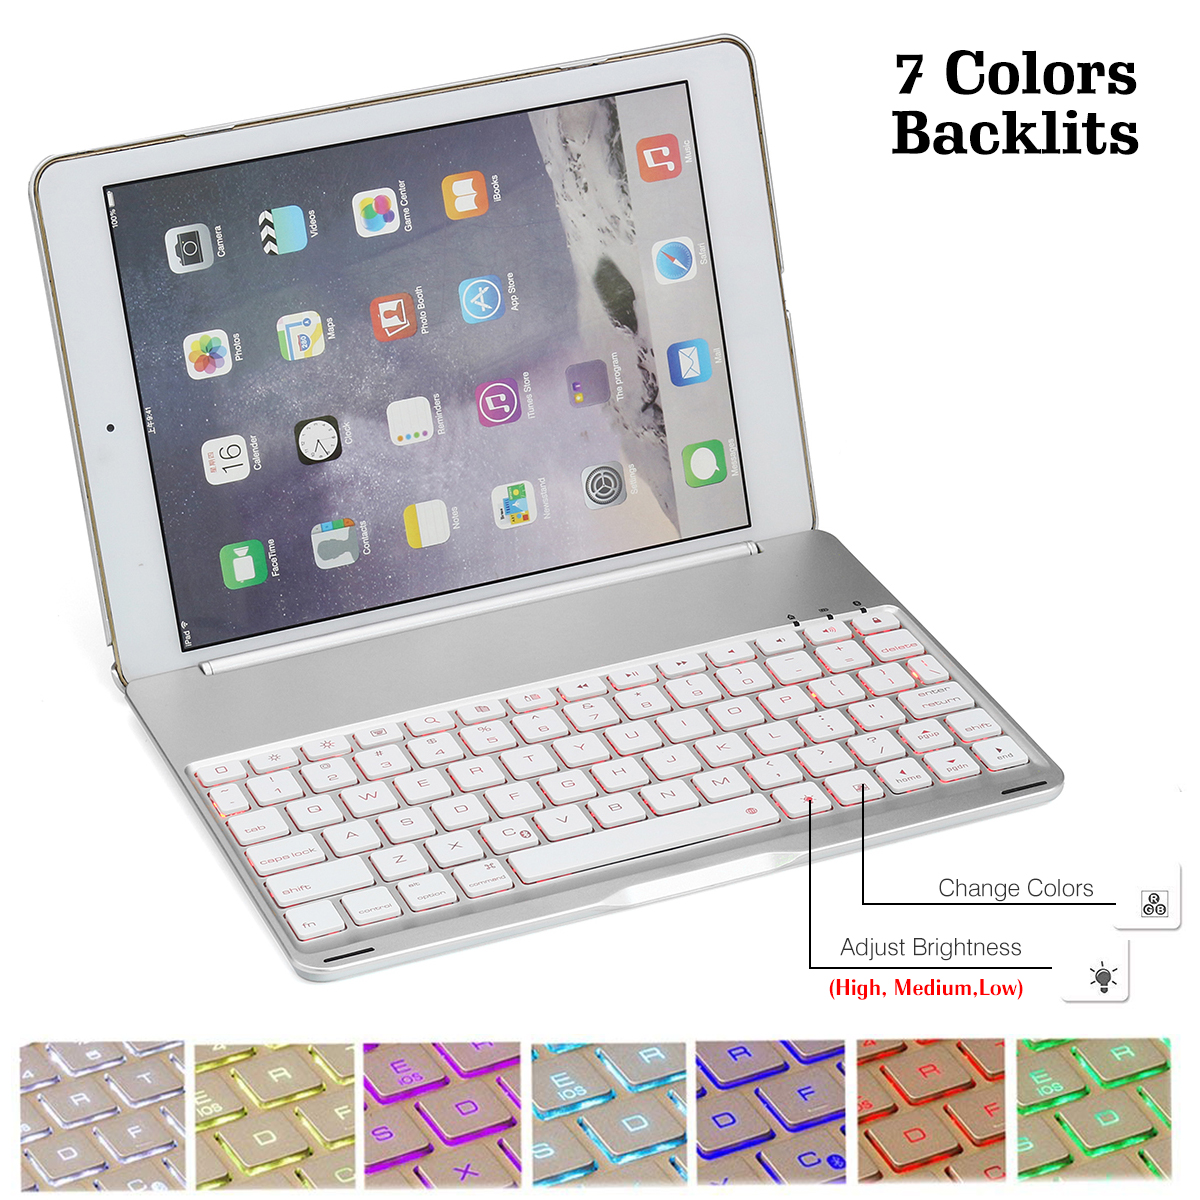 7 Colors Backlit Aluminum Alloy Wireless bluetooth Keyboard Case For iPad Air/iPad Air 2 12